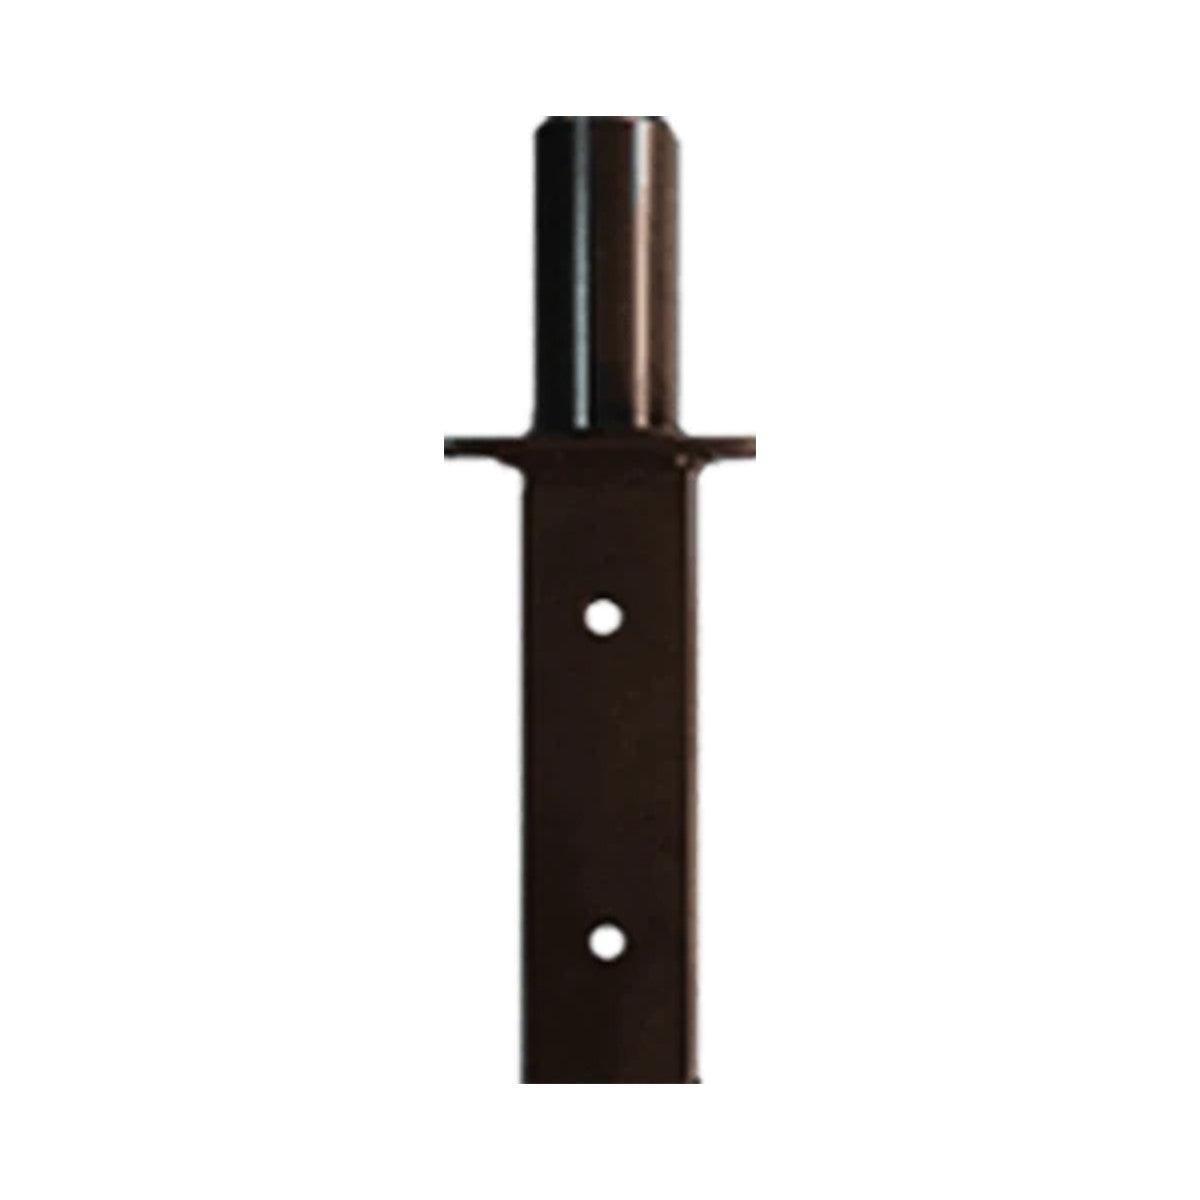 RAB Lighting BAD5 Poles Pole Adaptor For 2 3/8 Tenon To 5 Inches Square Pole With Hardware, Bronze Finish - Bees Lighting